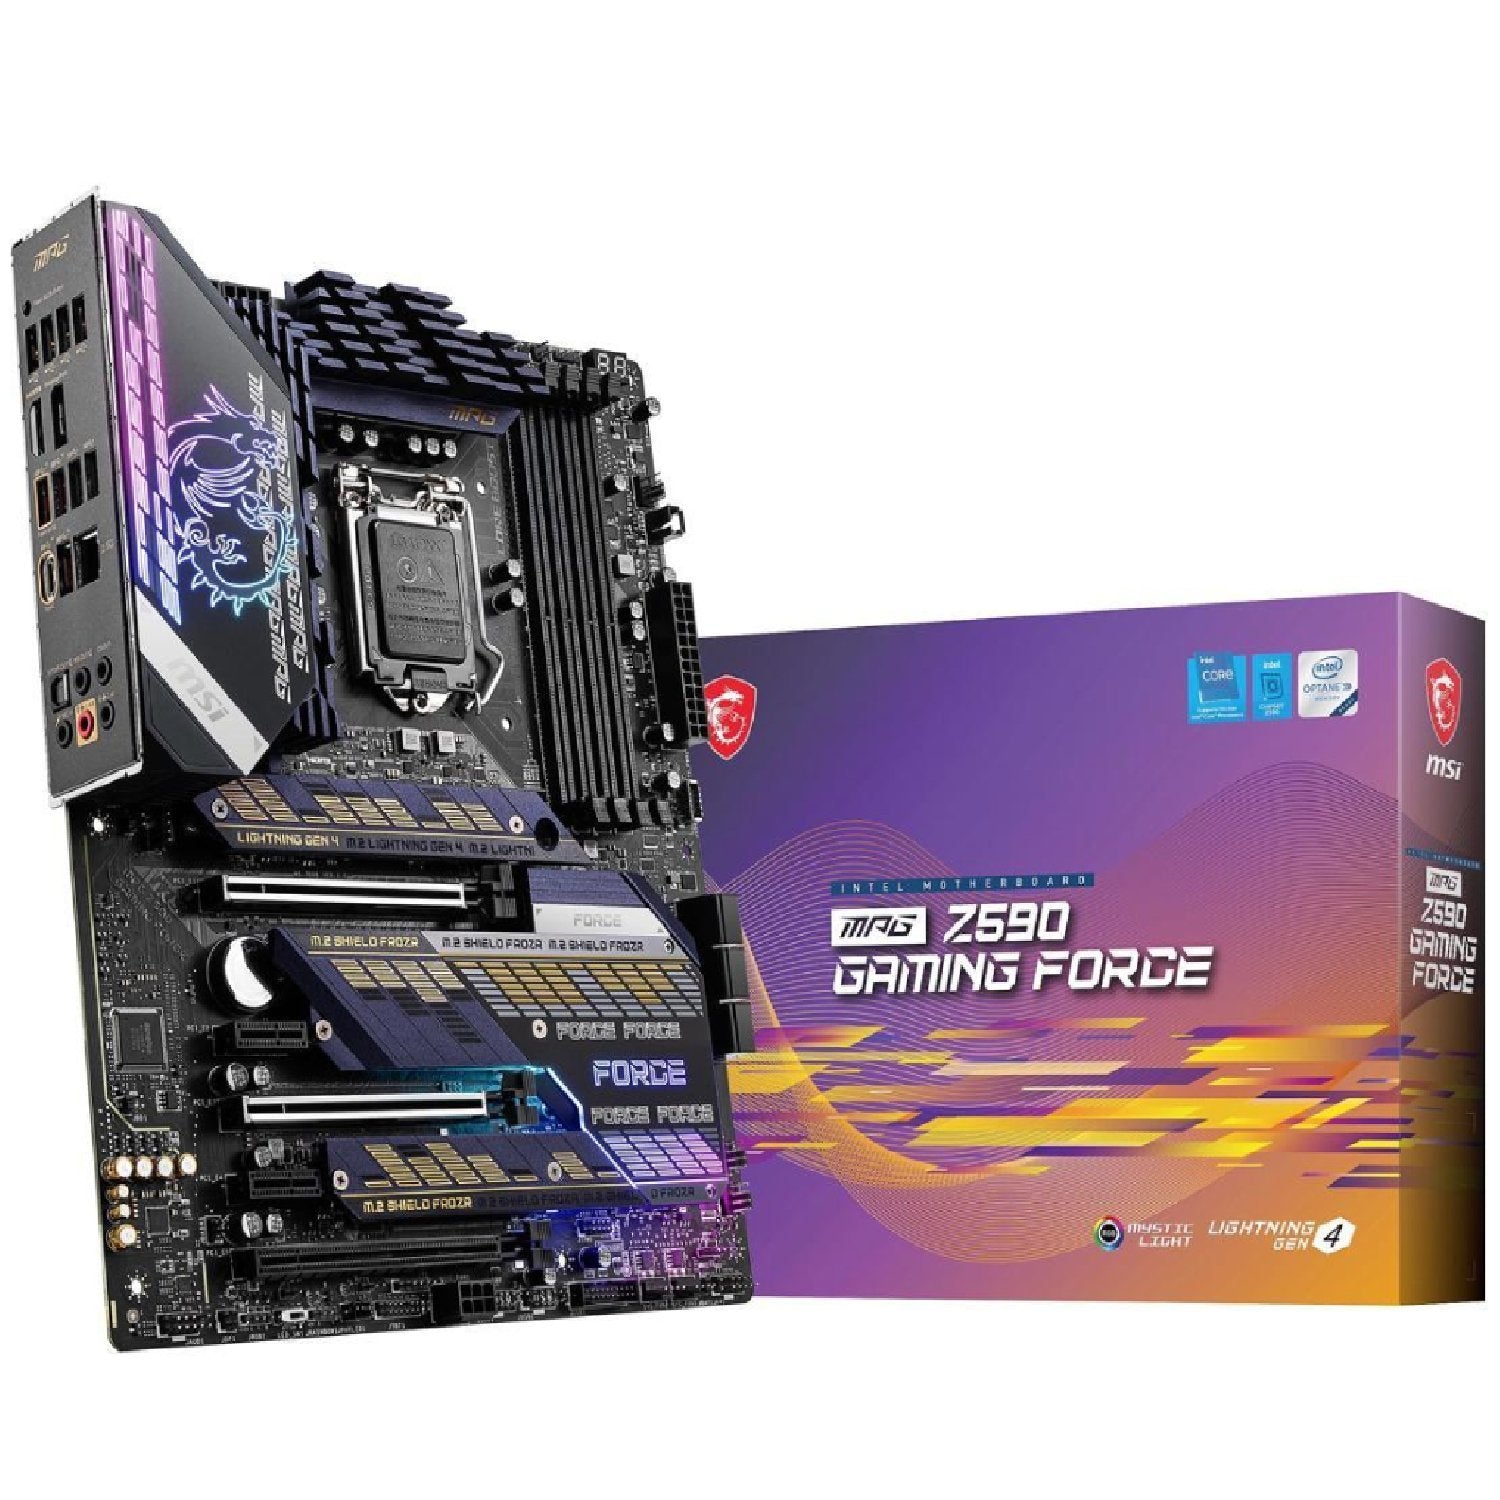 MSI MPG Z590 Gaming Force Motherboard - Store 974 | ستور ٩٧٤